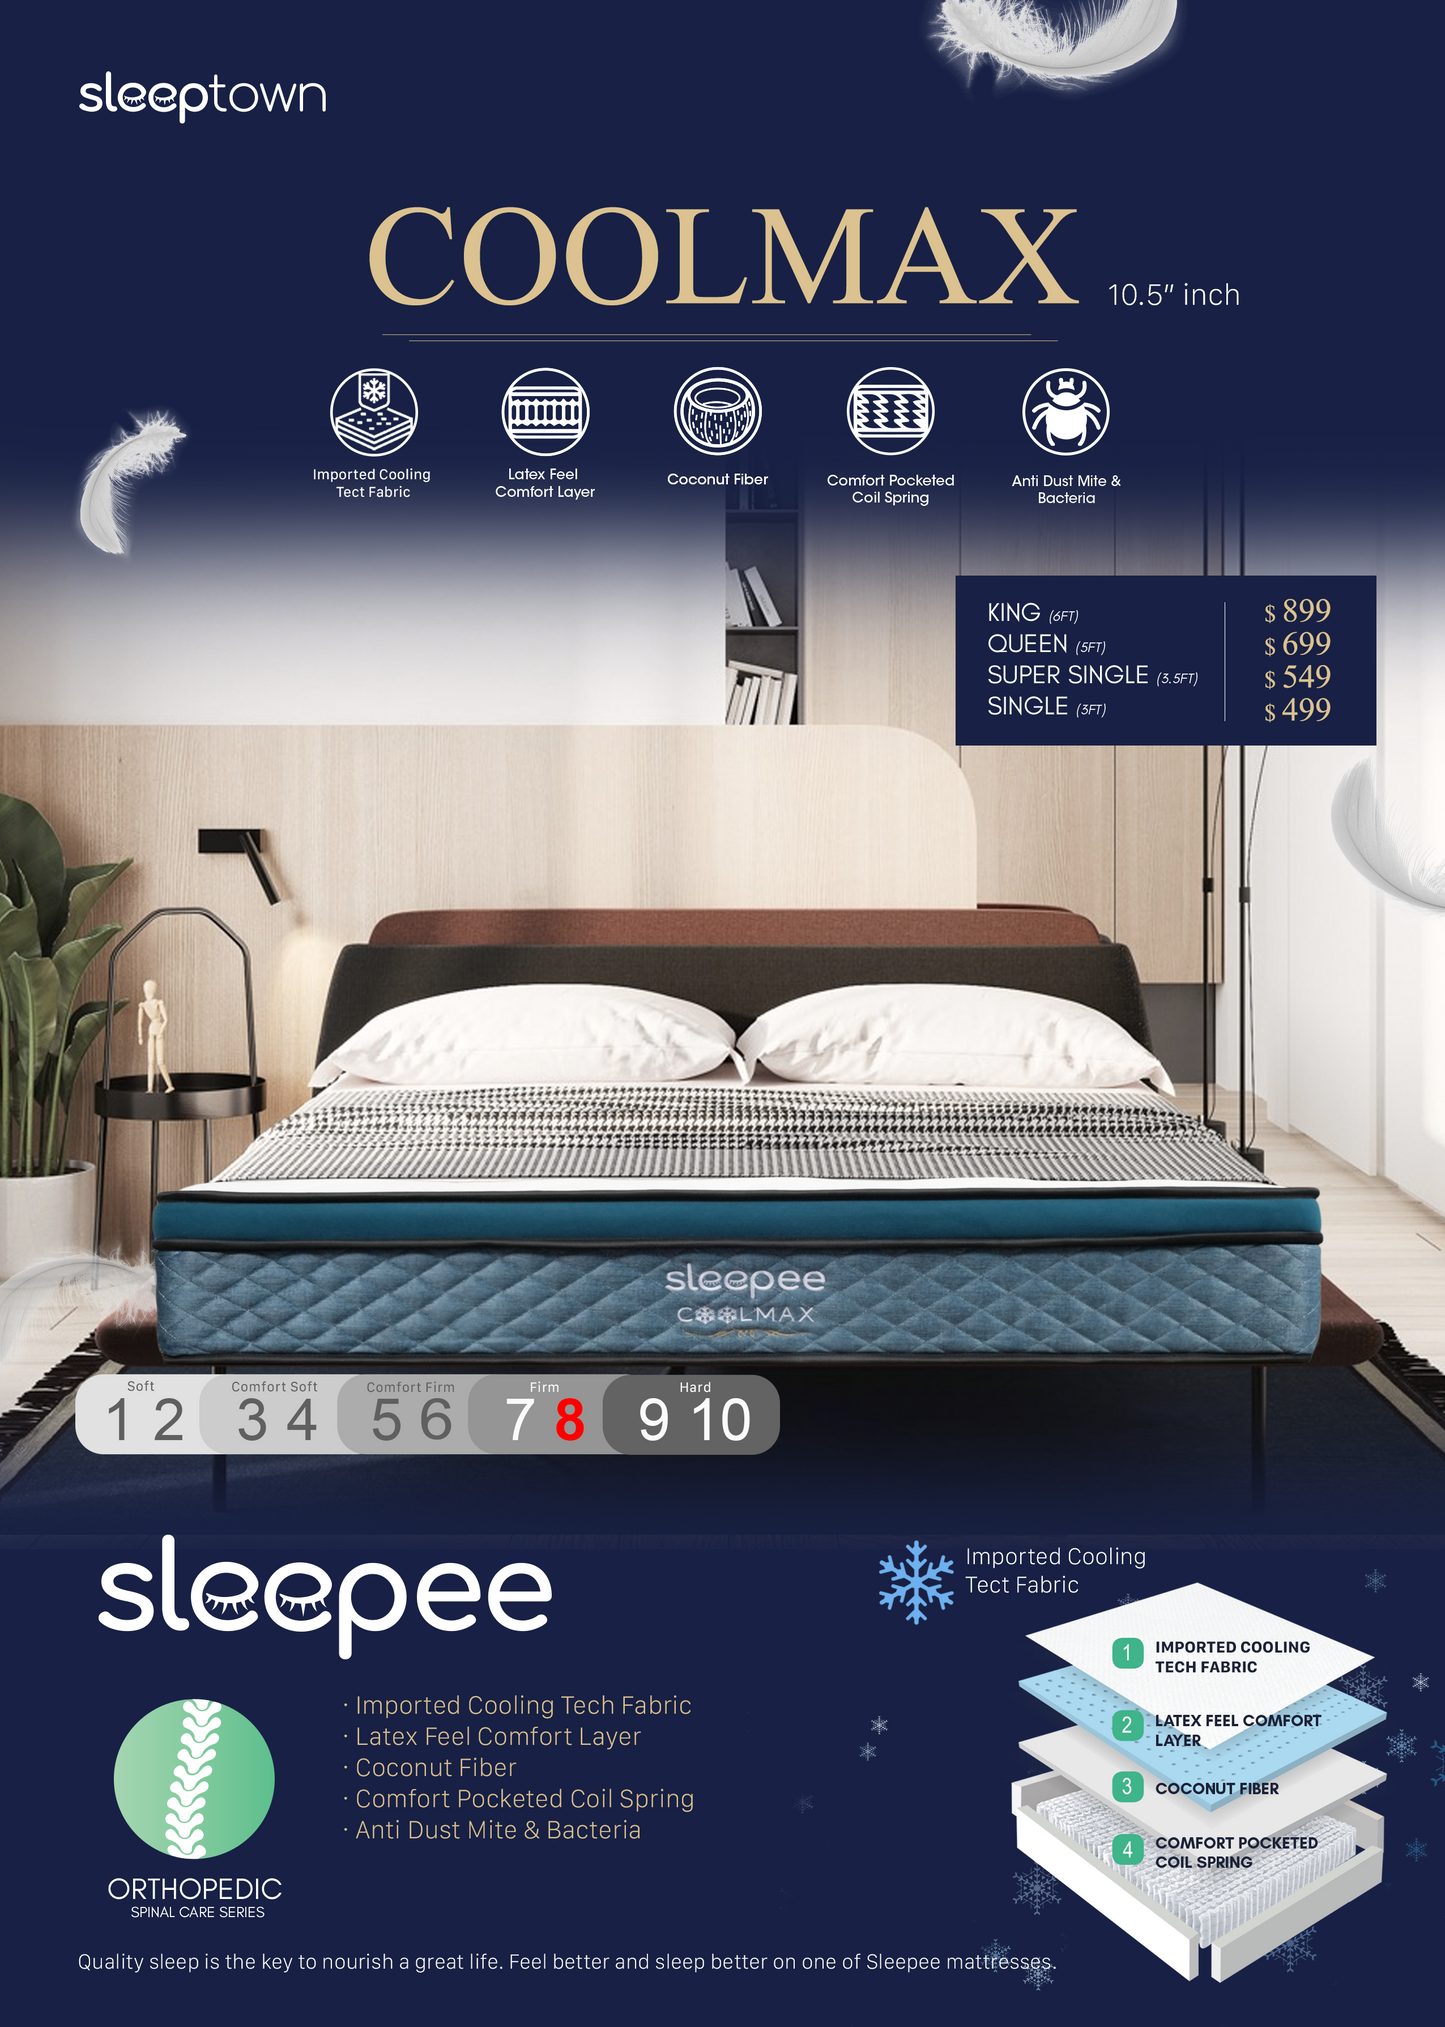 Sleepee Coolmax - 10.5"inch Cooling Max Latex Feel 5 Zone (Zero Motion) Individual Pocketed Spring Mattress